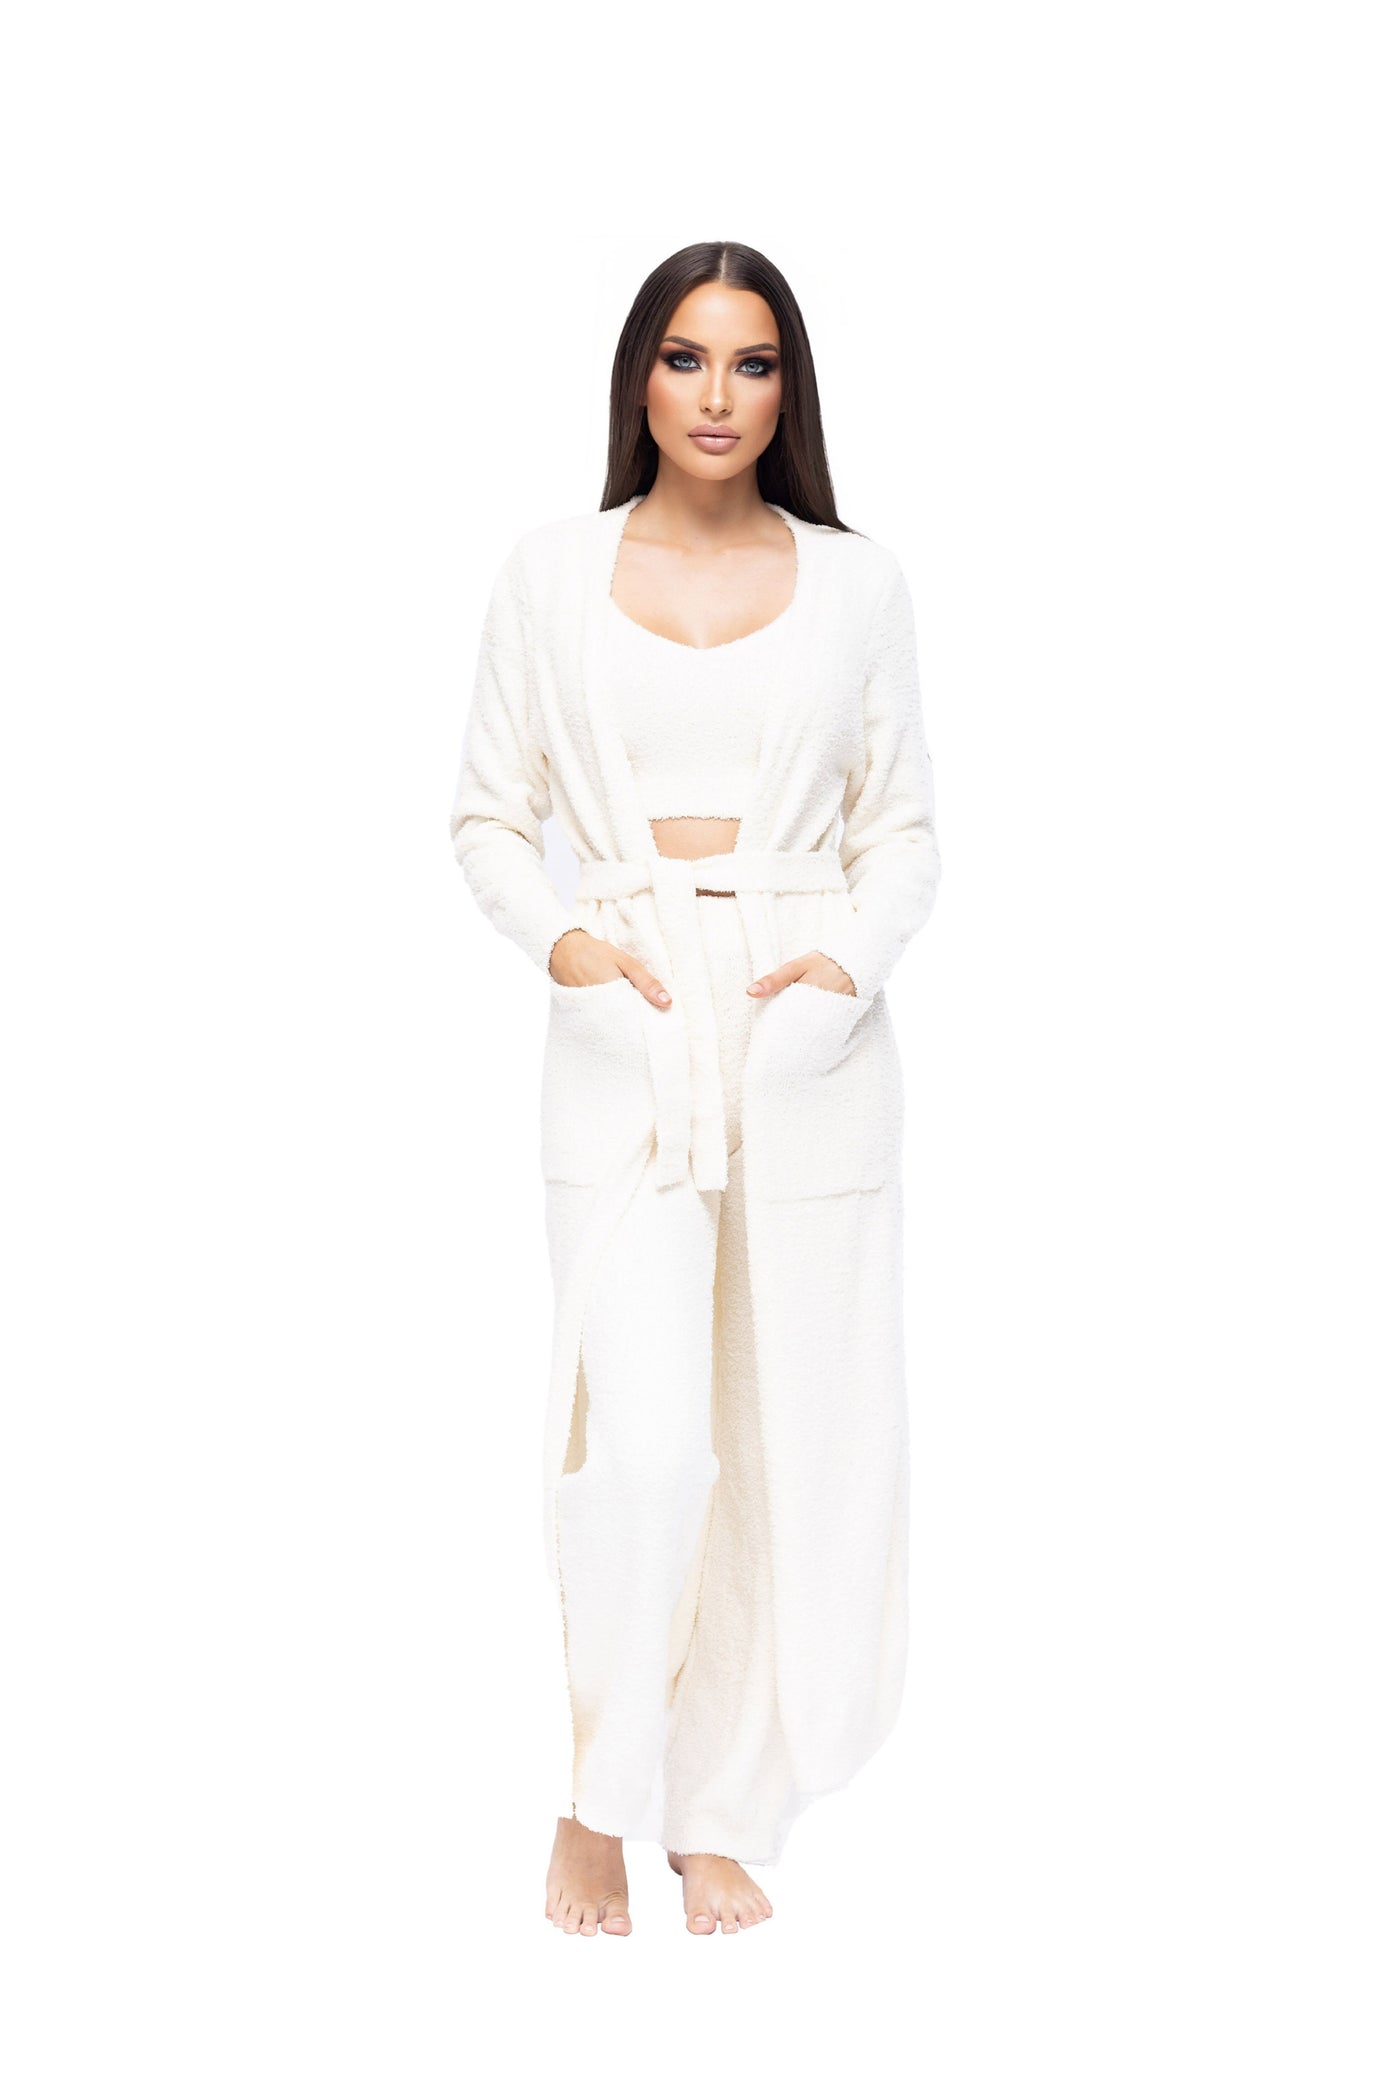 1 Piece Set. Women's Ultra Luxurious Soft and Cozy Long Robe - White - One Size